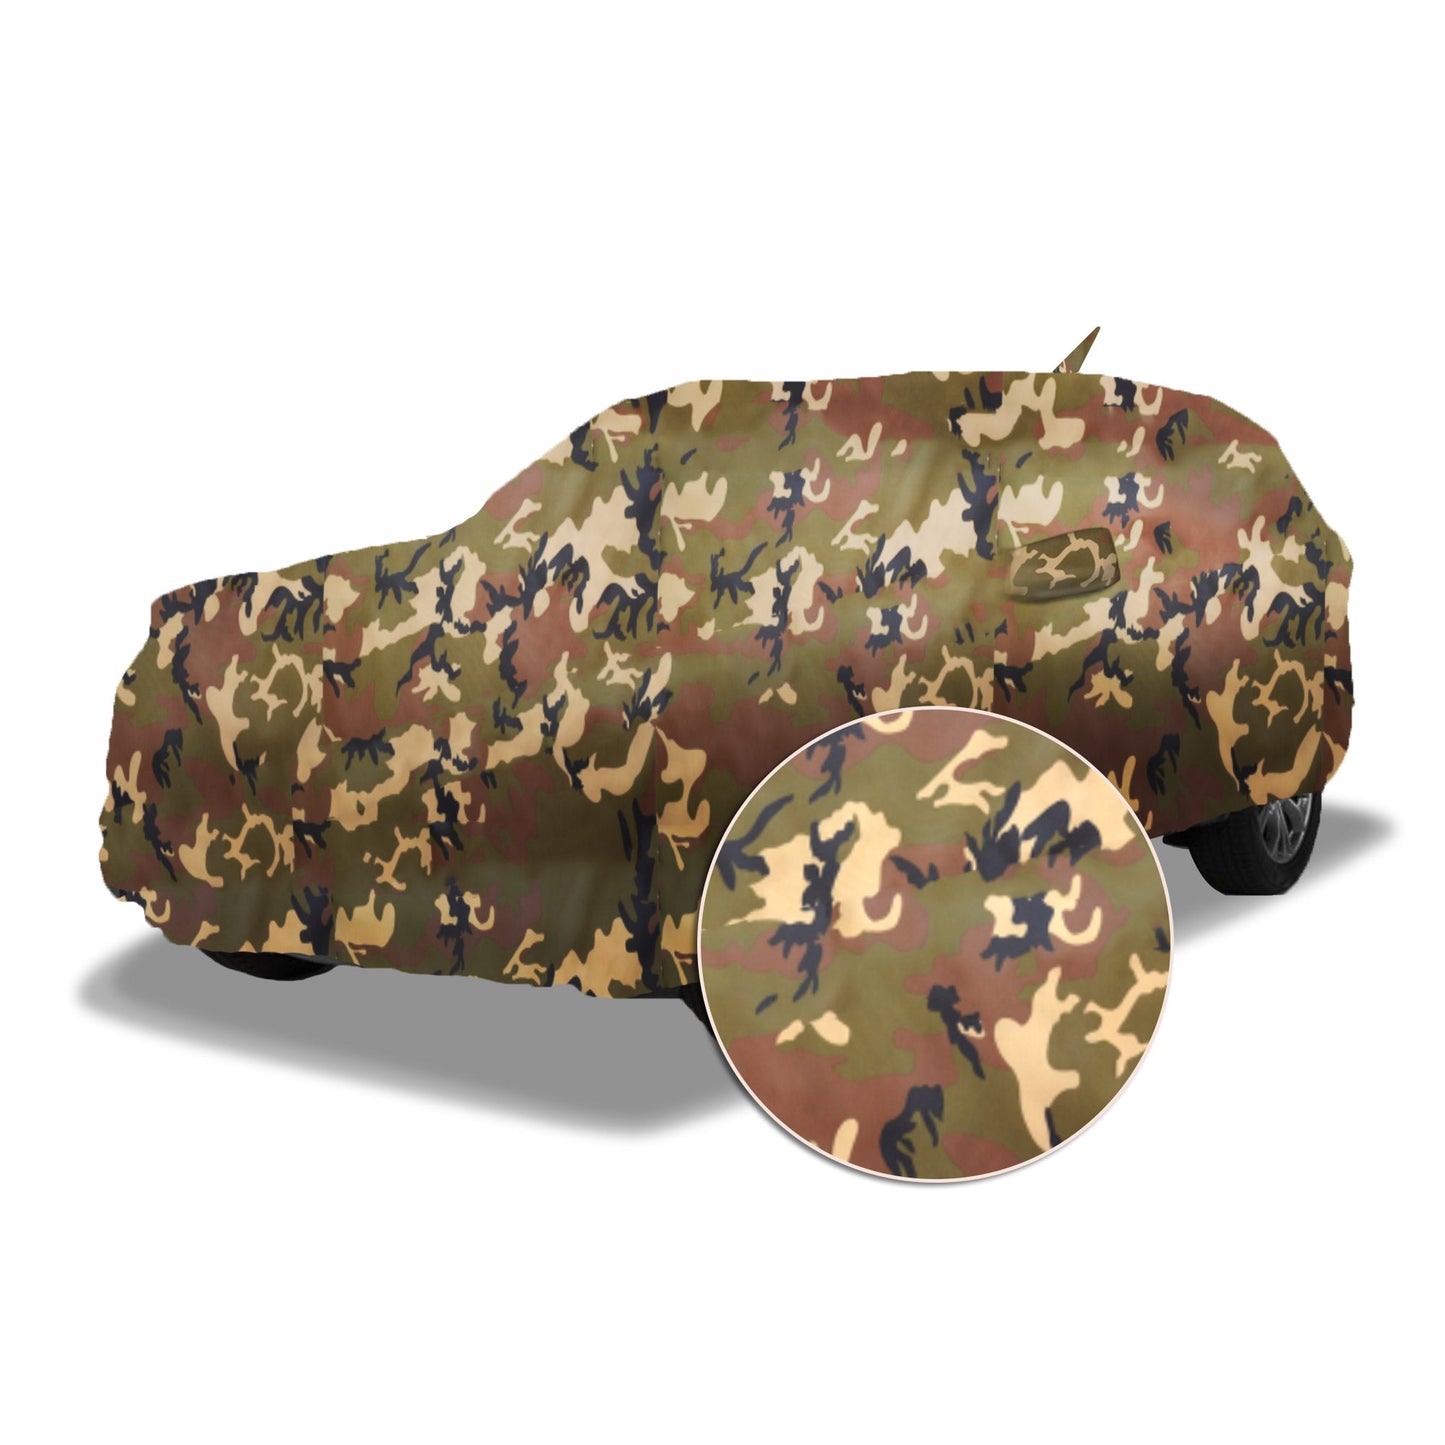 Ascot Maruti Suzuki Nexa S-Cross 2015-2024 Model Car Body Cover Extra Strong & Dust Proof Jungle Military Car Cover with UV & Water-Resistant Coating